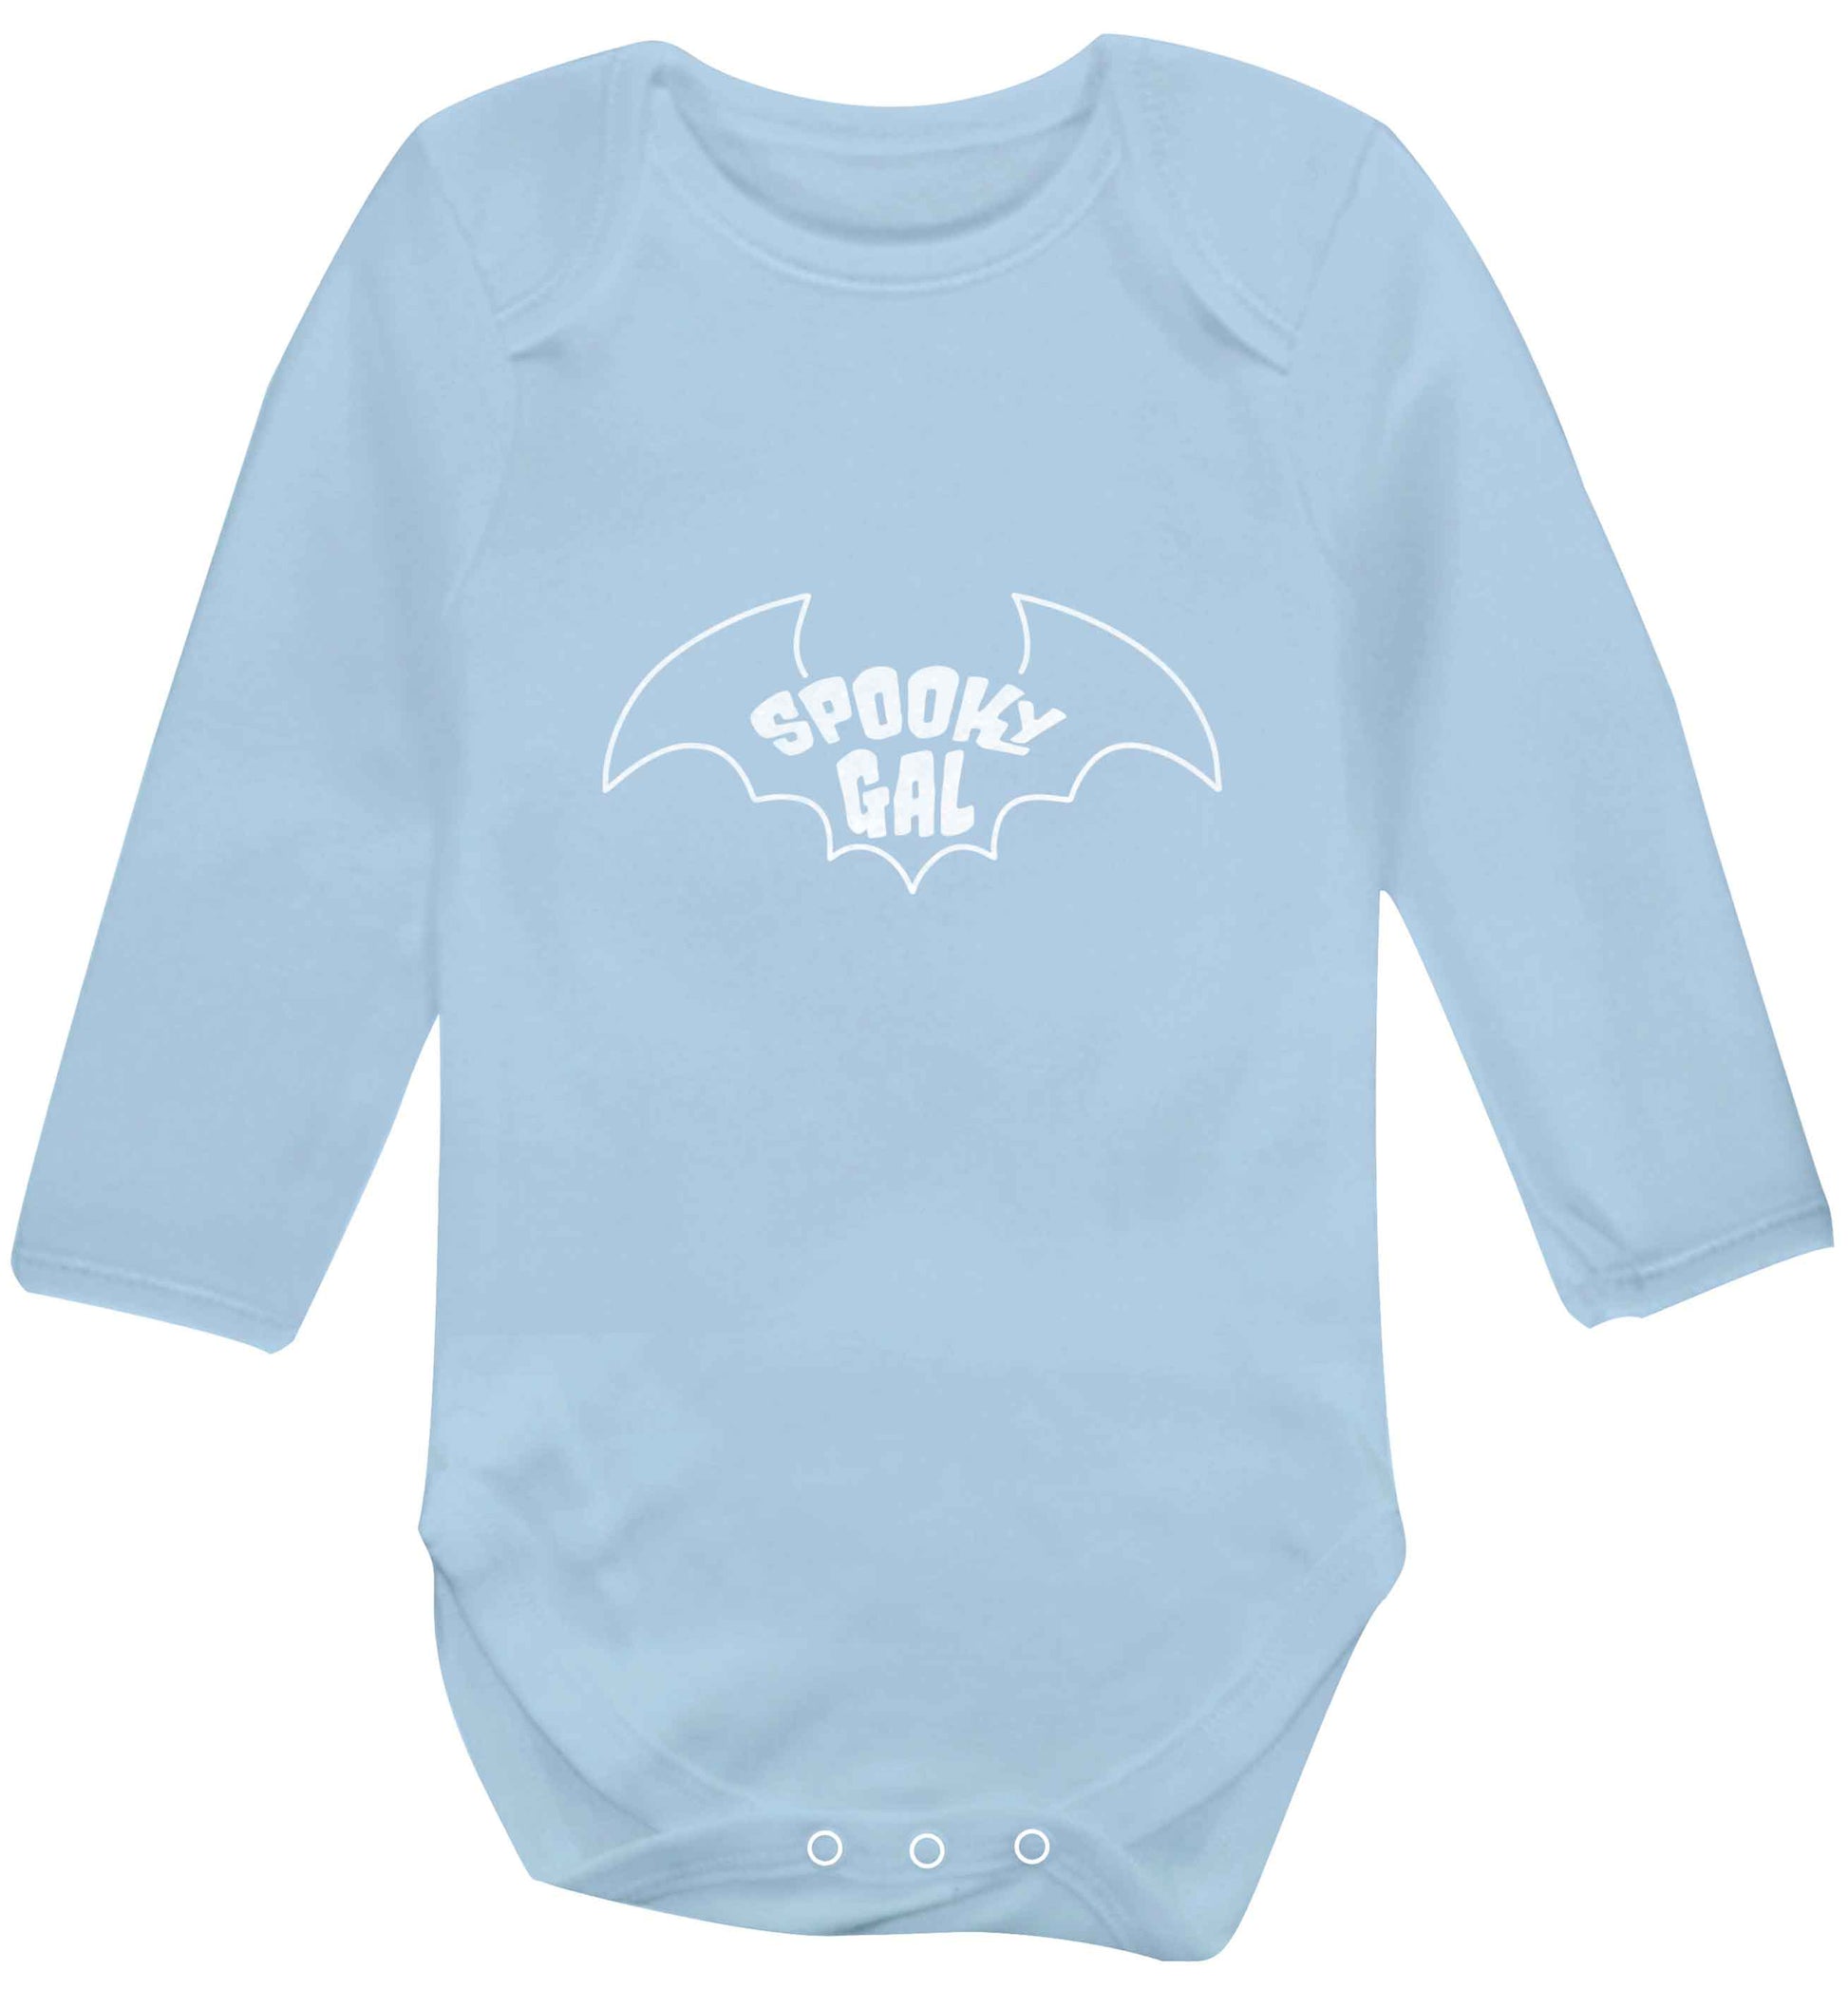 Spooky gal Kit baby vest long sleeved pale blue 6-12 months